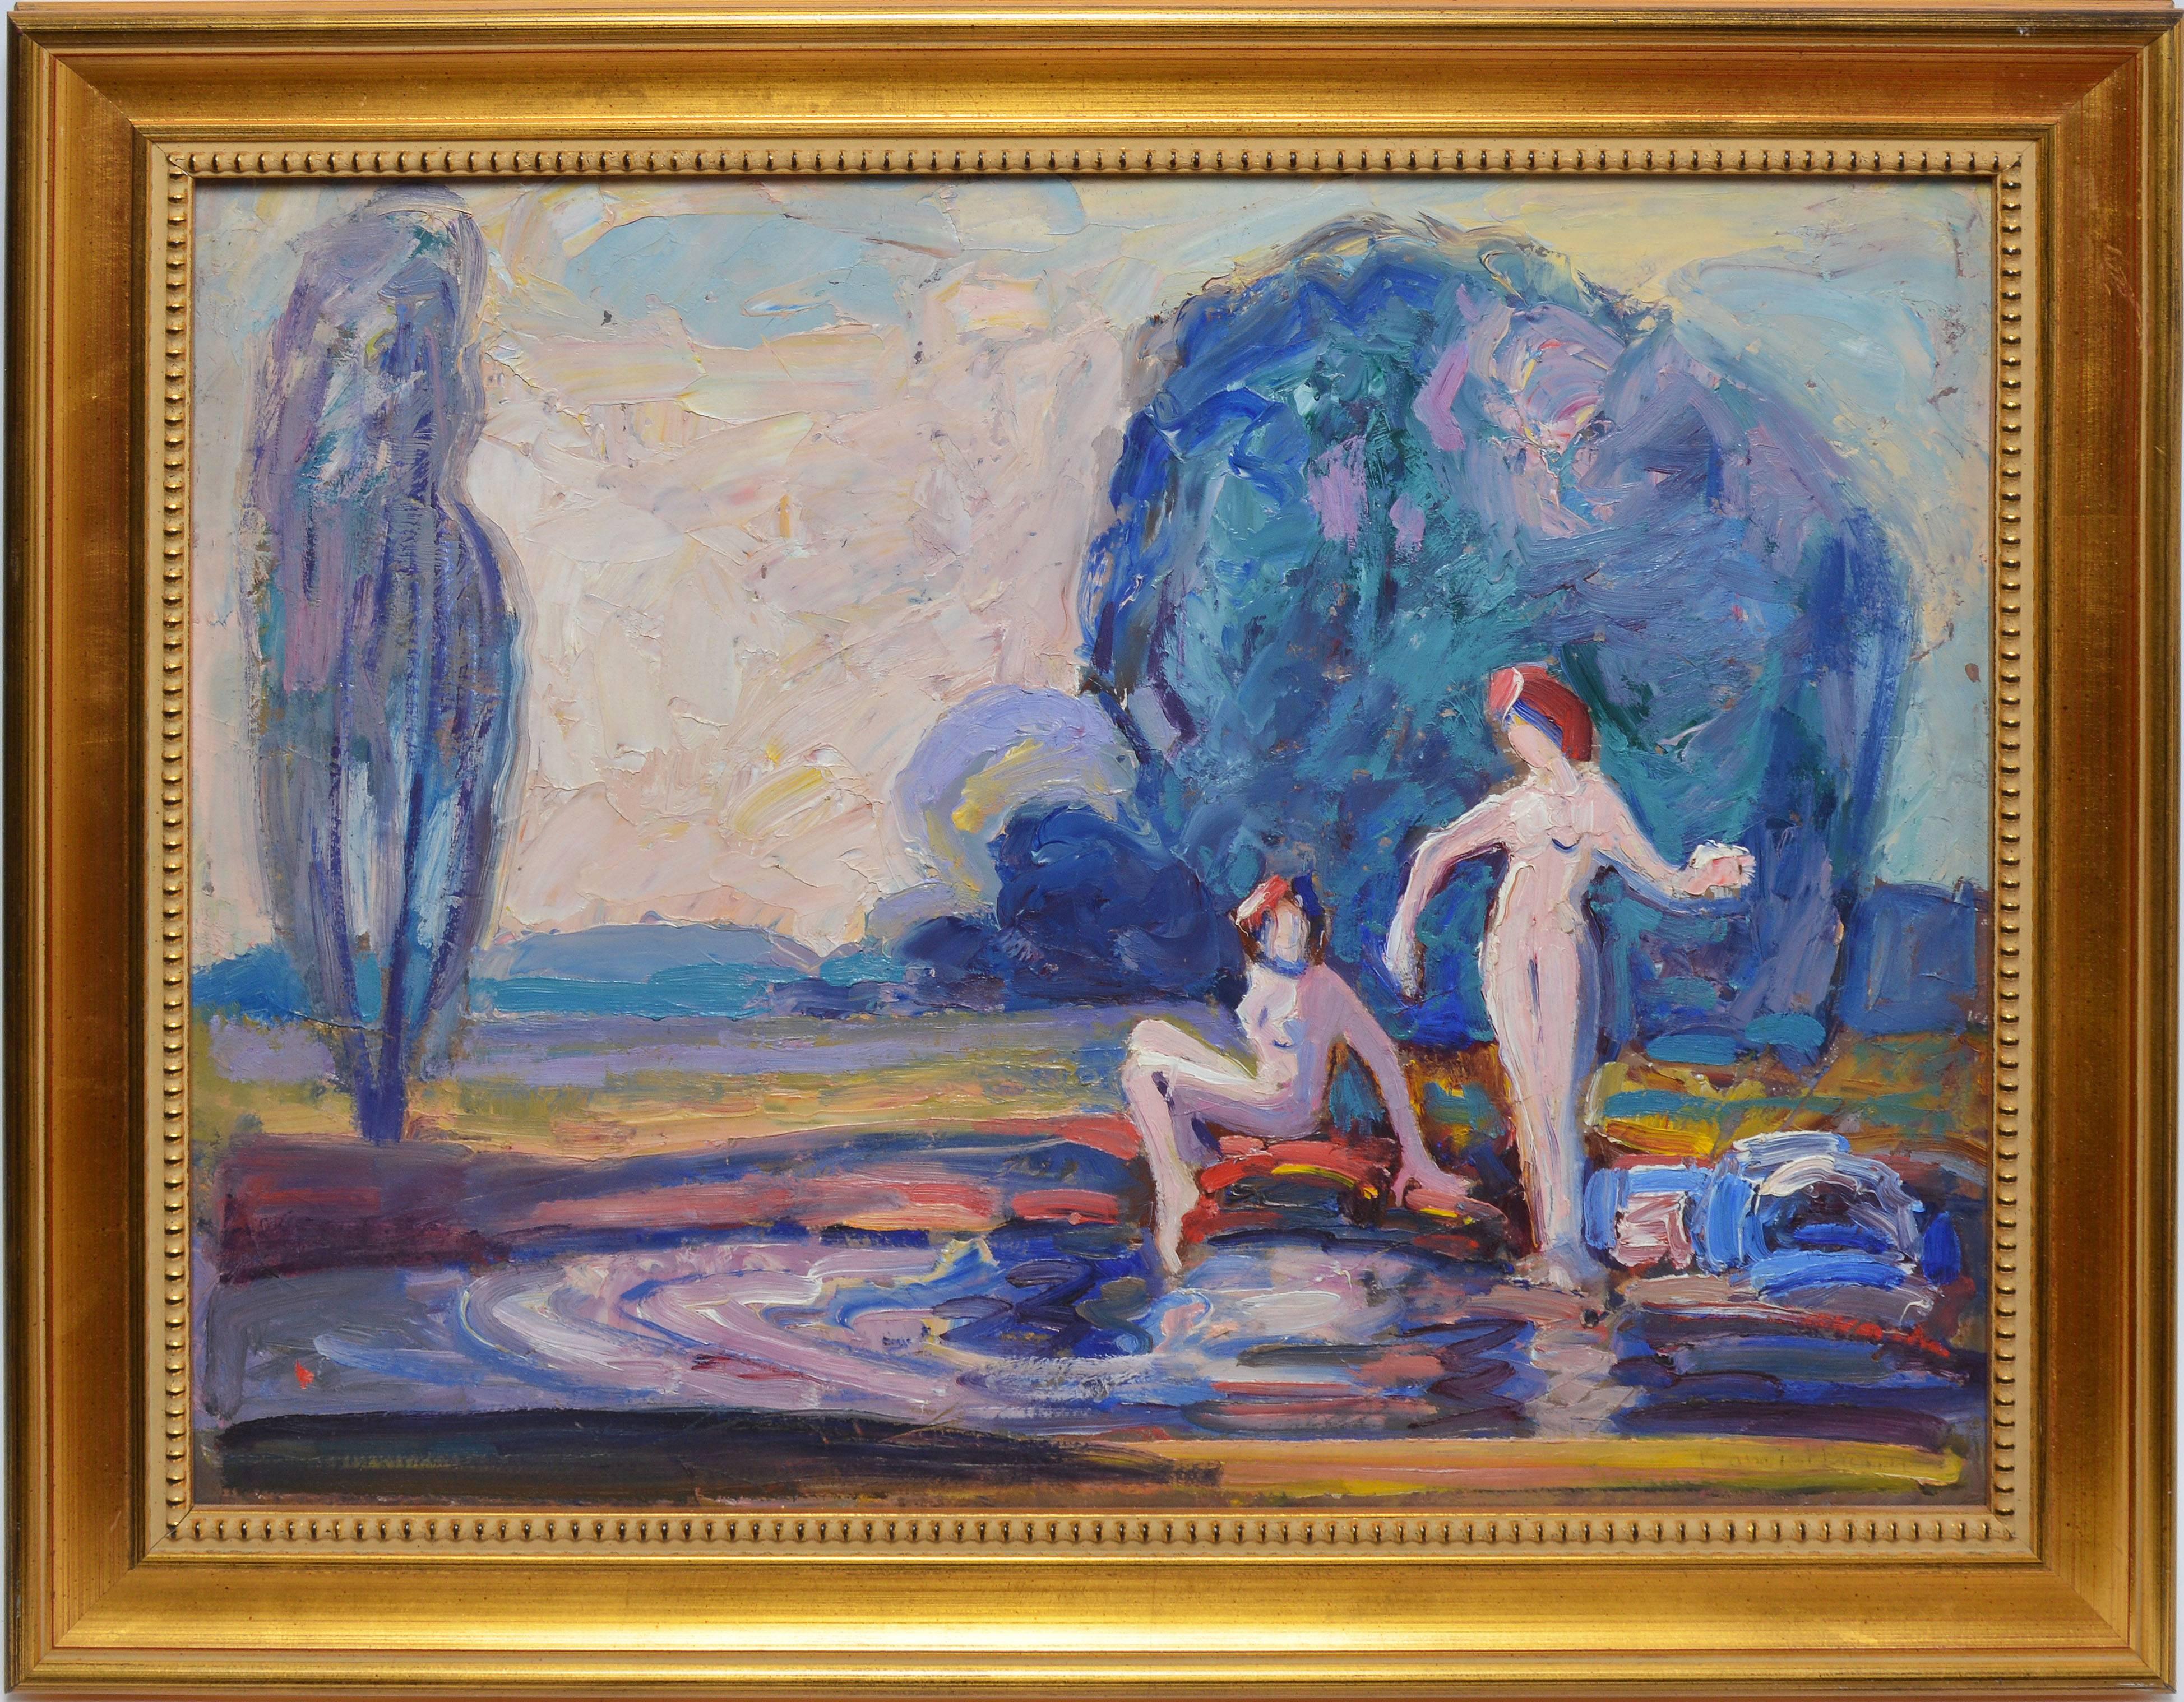 Francis Brown Nude Painting - Impressionist Landscape with Nude Figures by Francis Focer Brown